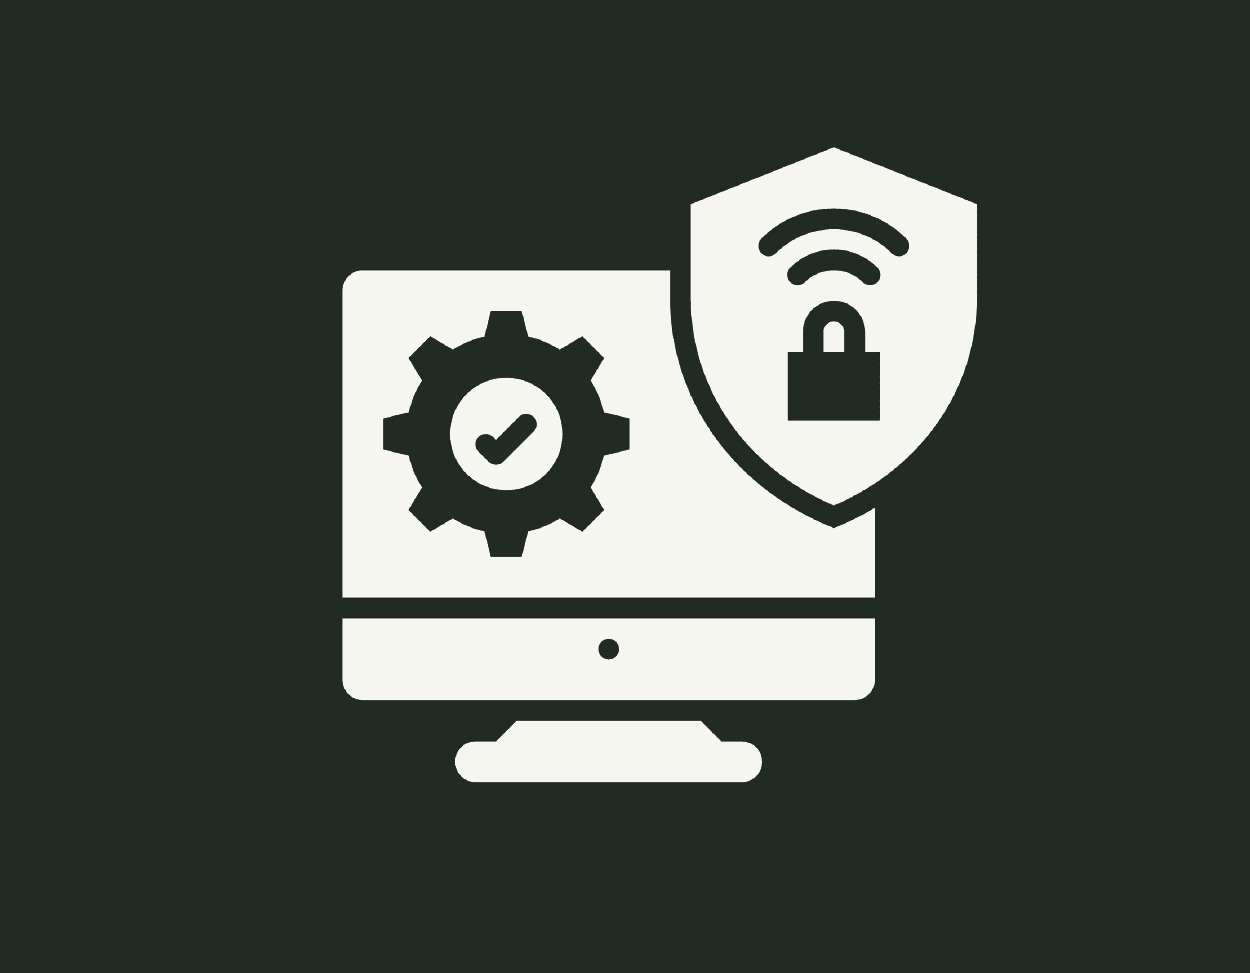 Cream cybersecurity icon on a green background